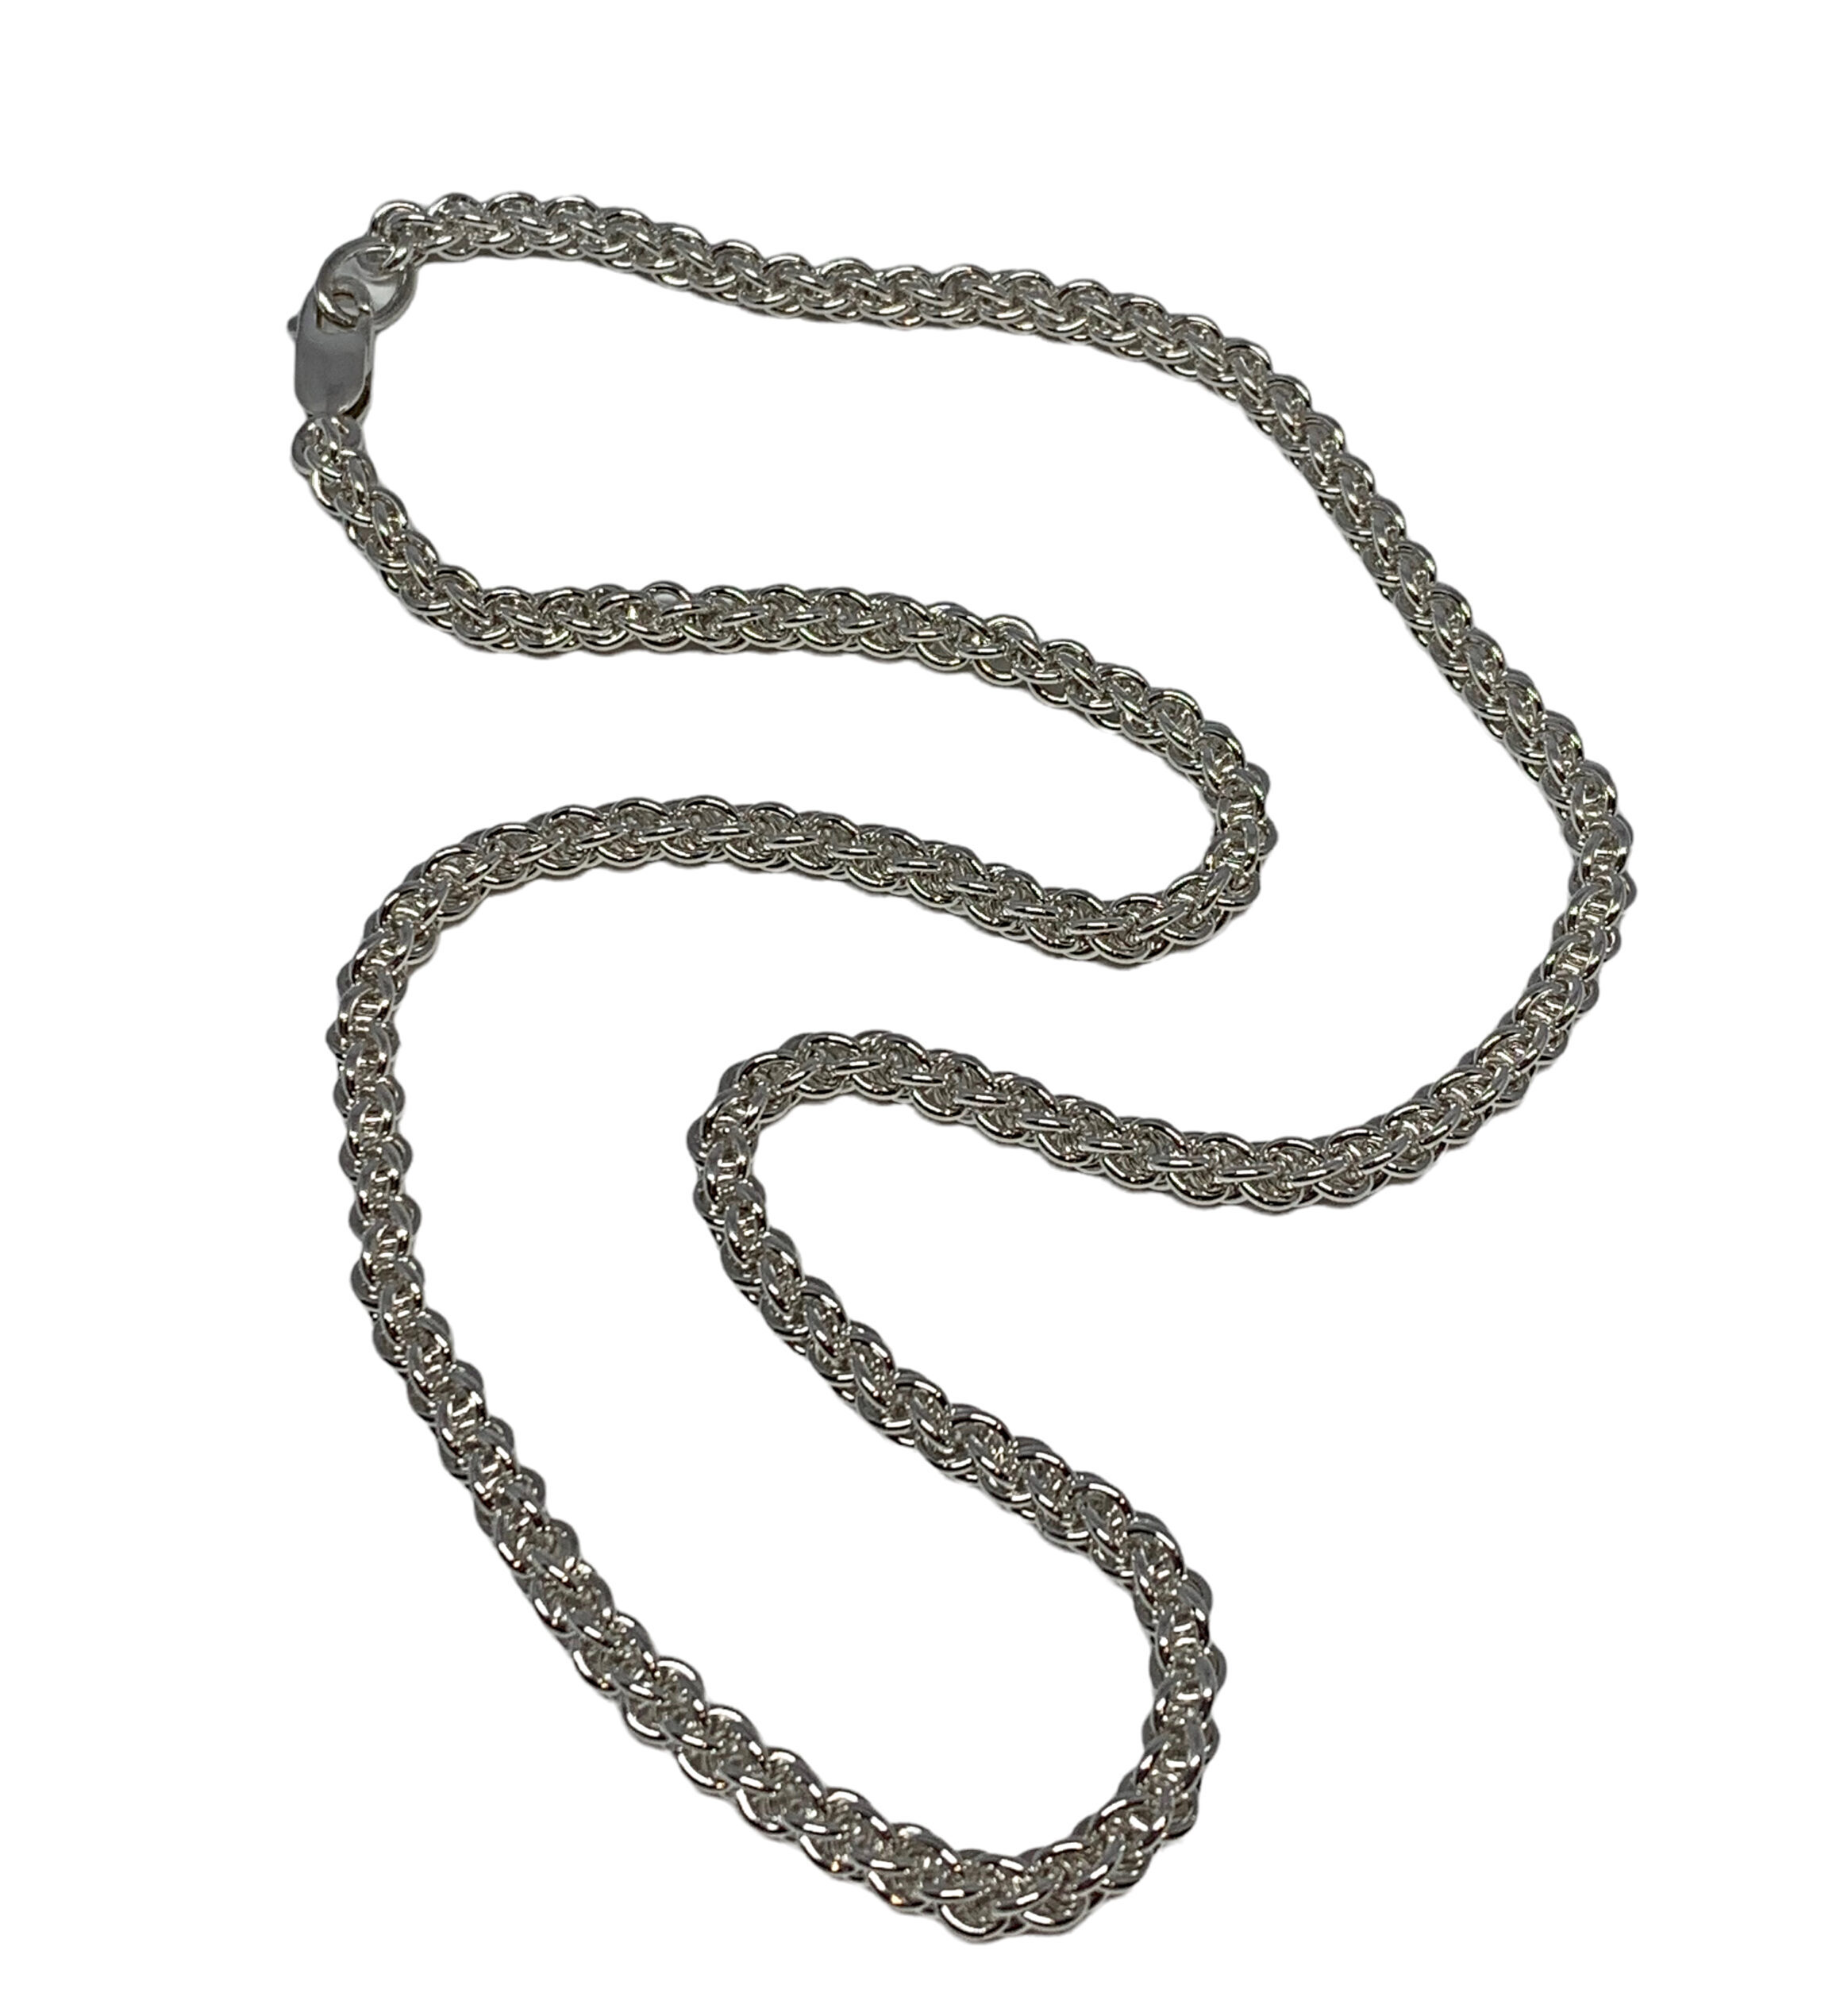 Locally handmade silver chainmaille necklace by A&R Jewellery | Effusion Art Gallery + Cast Glass Studio, Invermere BC